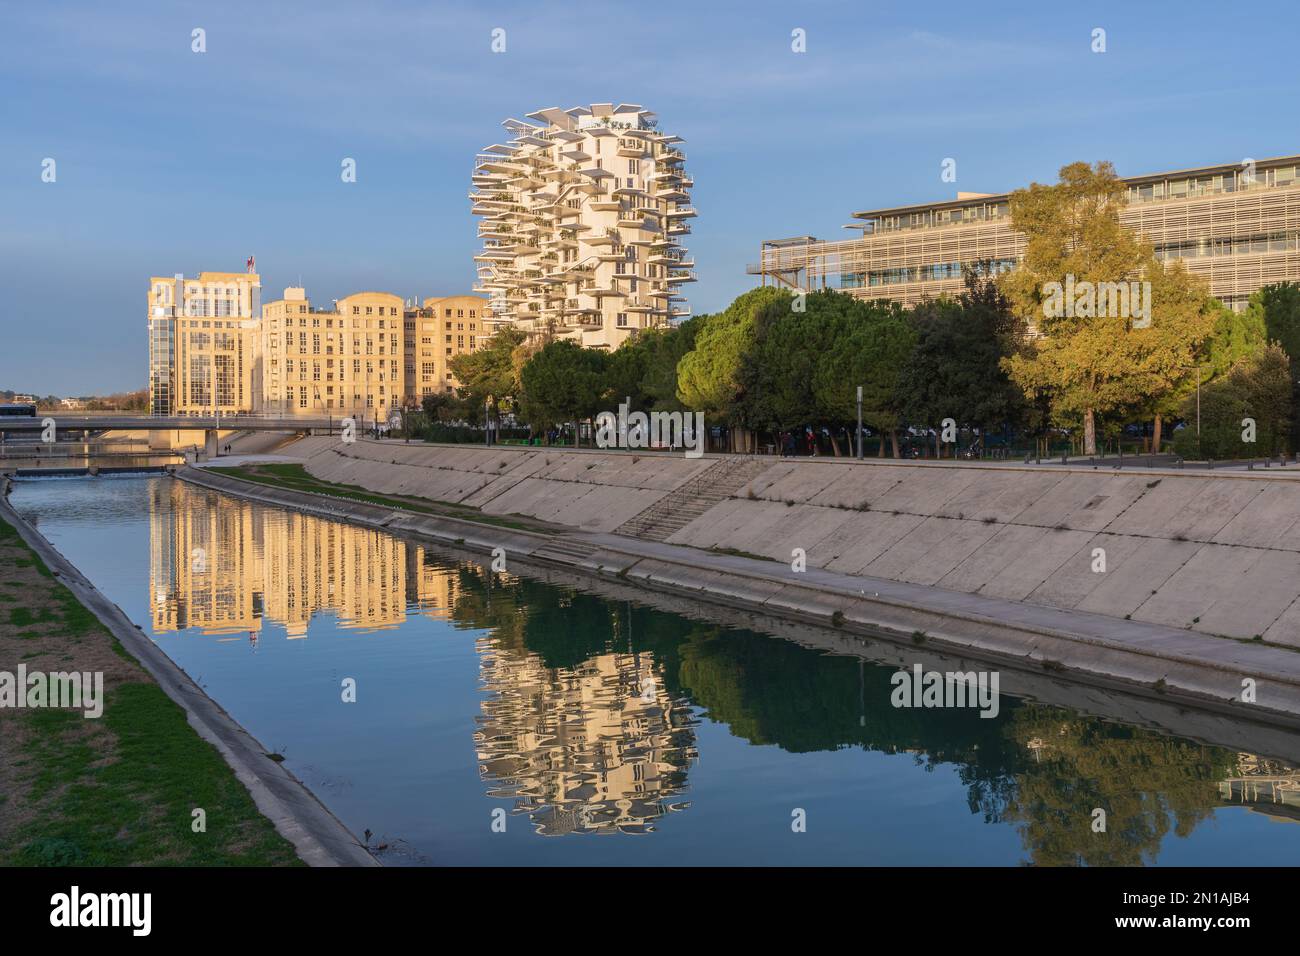 Montpellier, France - 01 12 2022 : Cityscape view of university library, arbre blanc and provincial hall modern architecture buildings with reflection Stock Photo